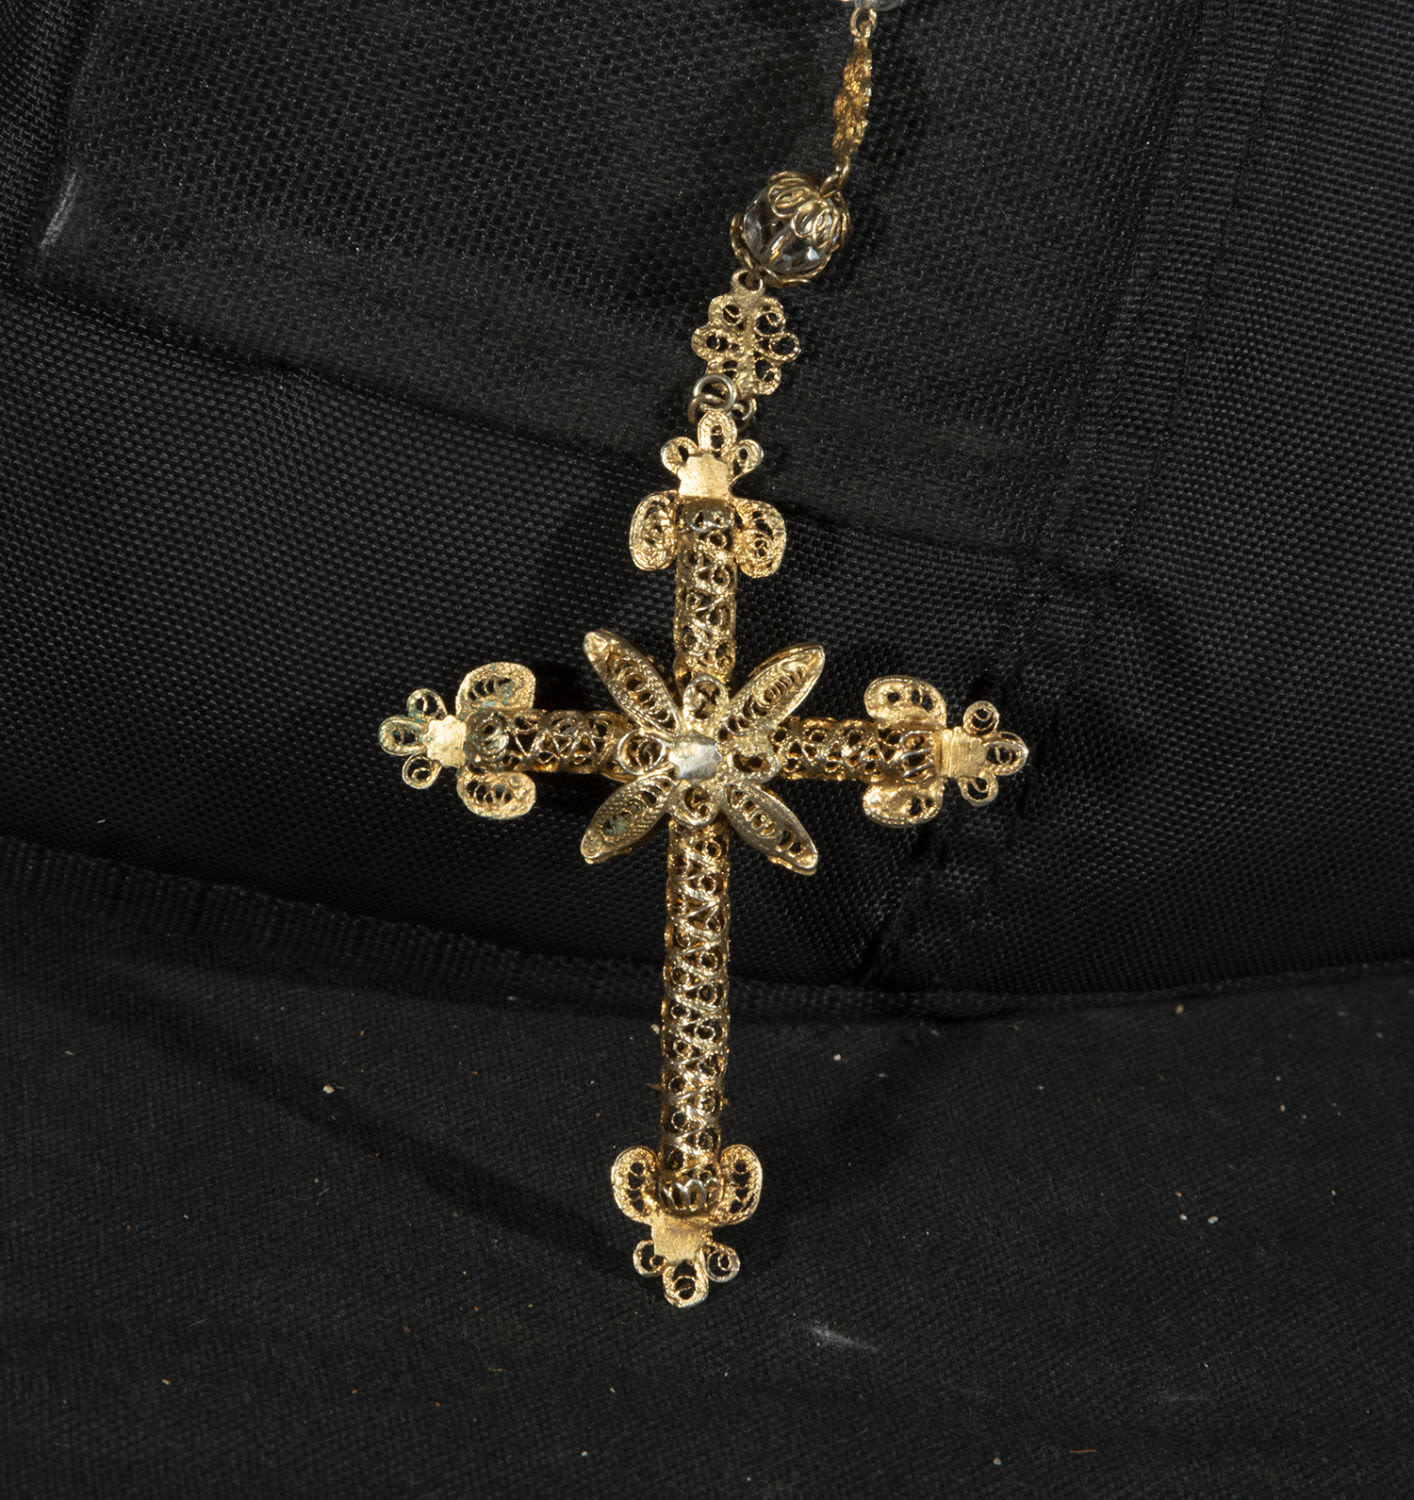 Italian rosary in gold-plated silver filigree and rock crystal, 19th century - Image 3 of 3